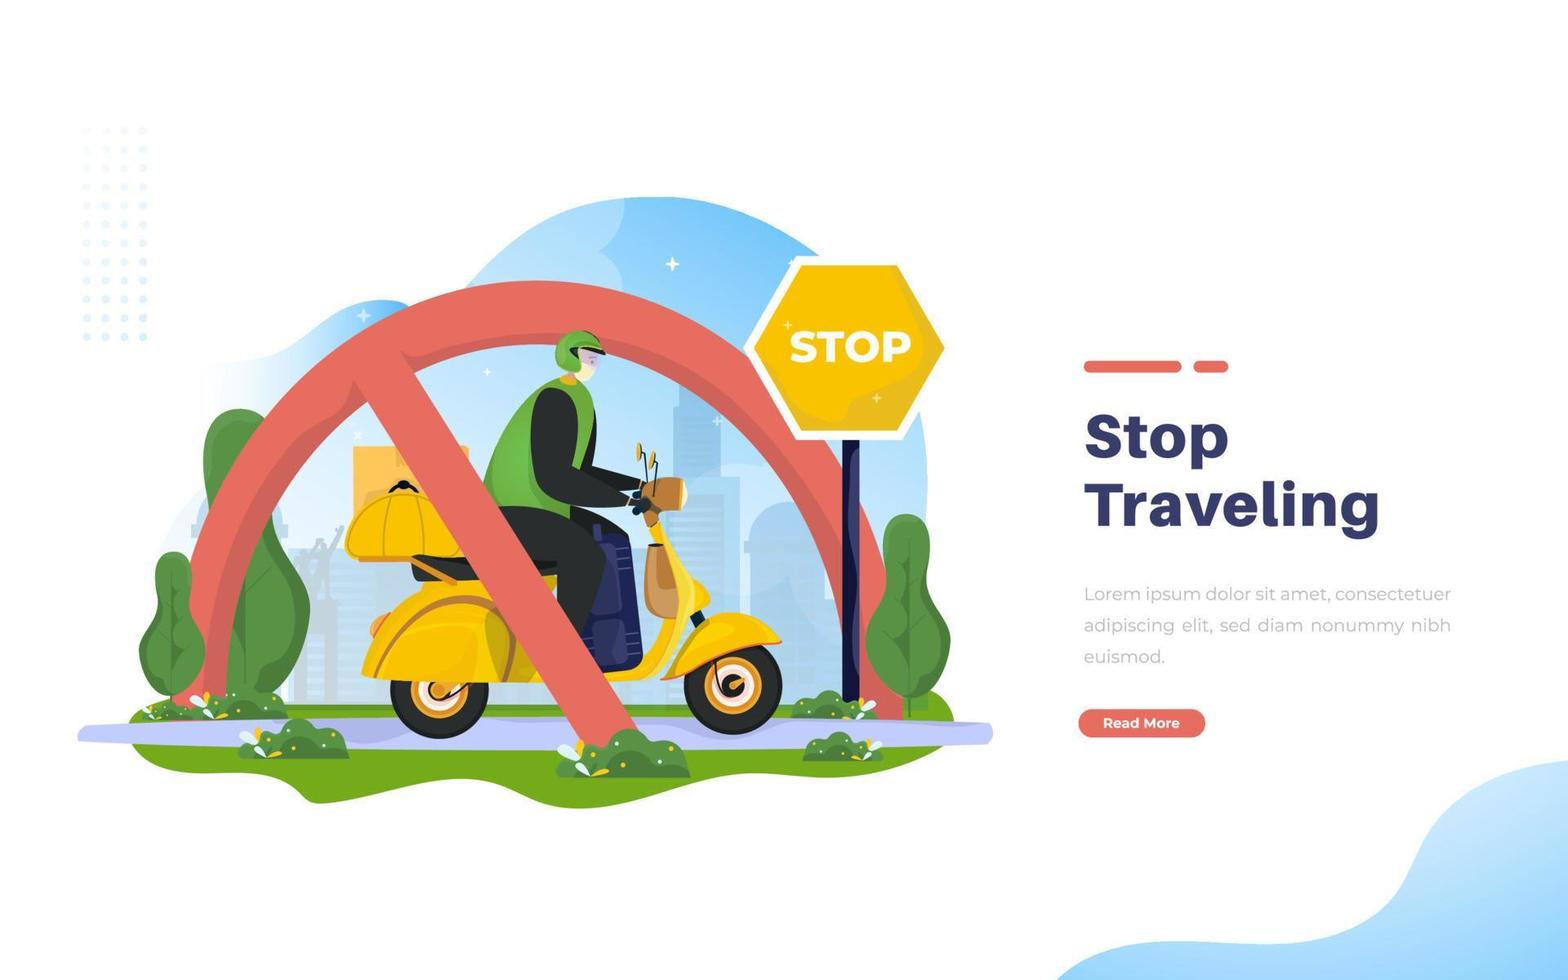 Stop traveling concept with a man on scooter illustration vector